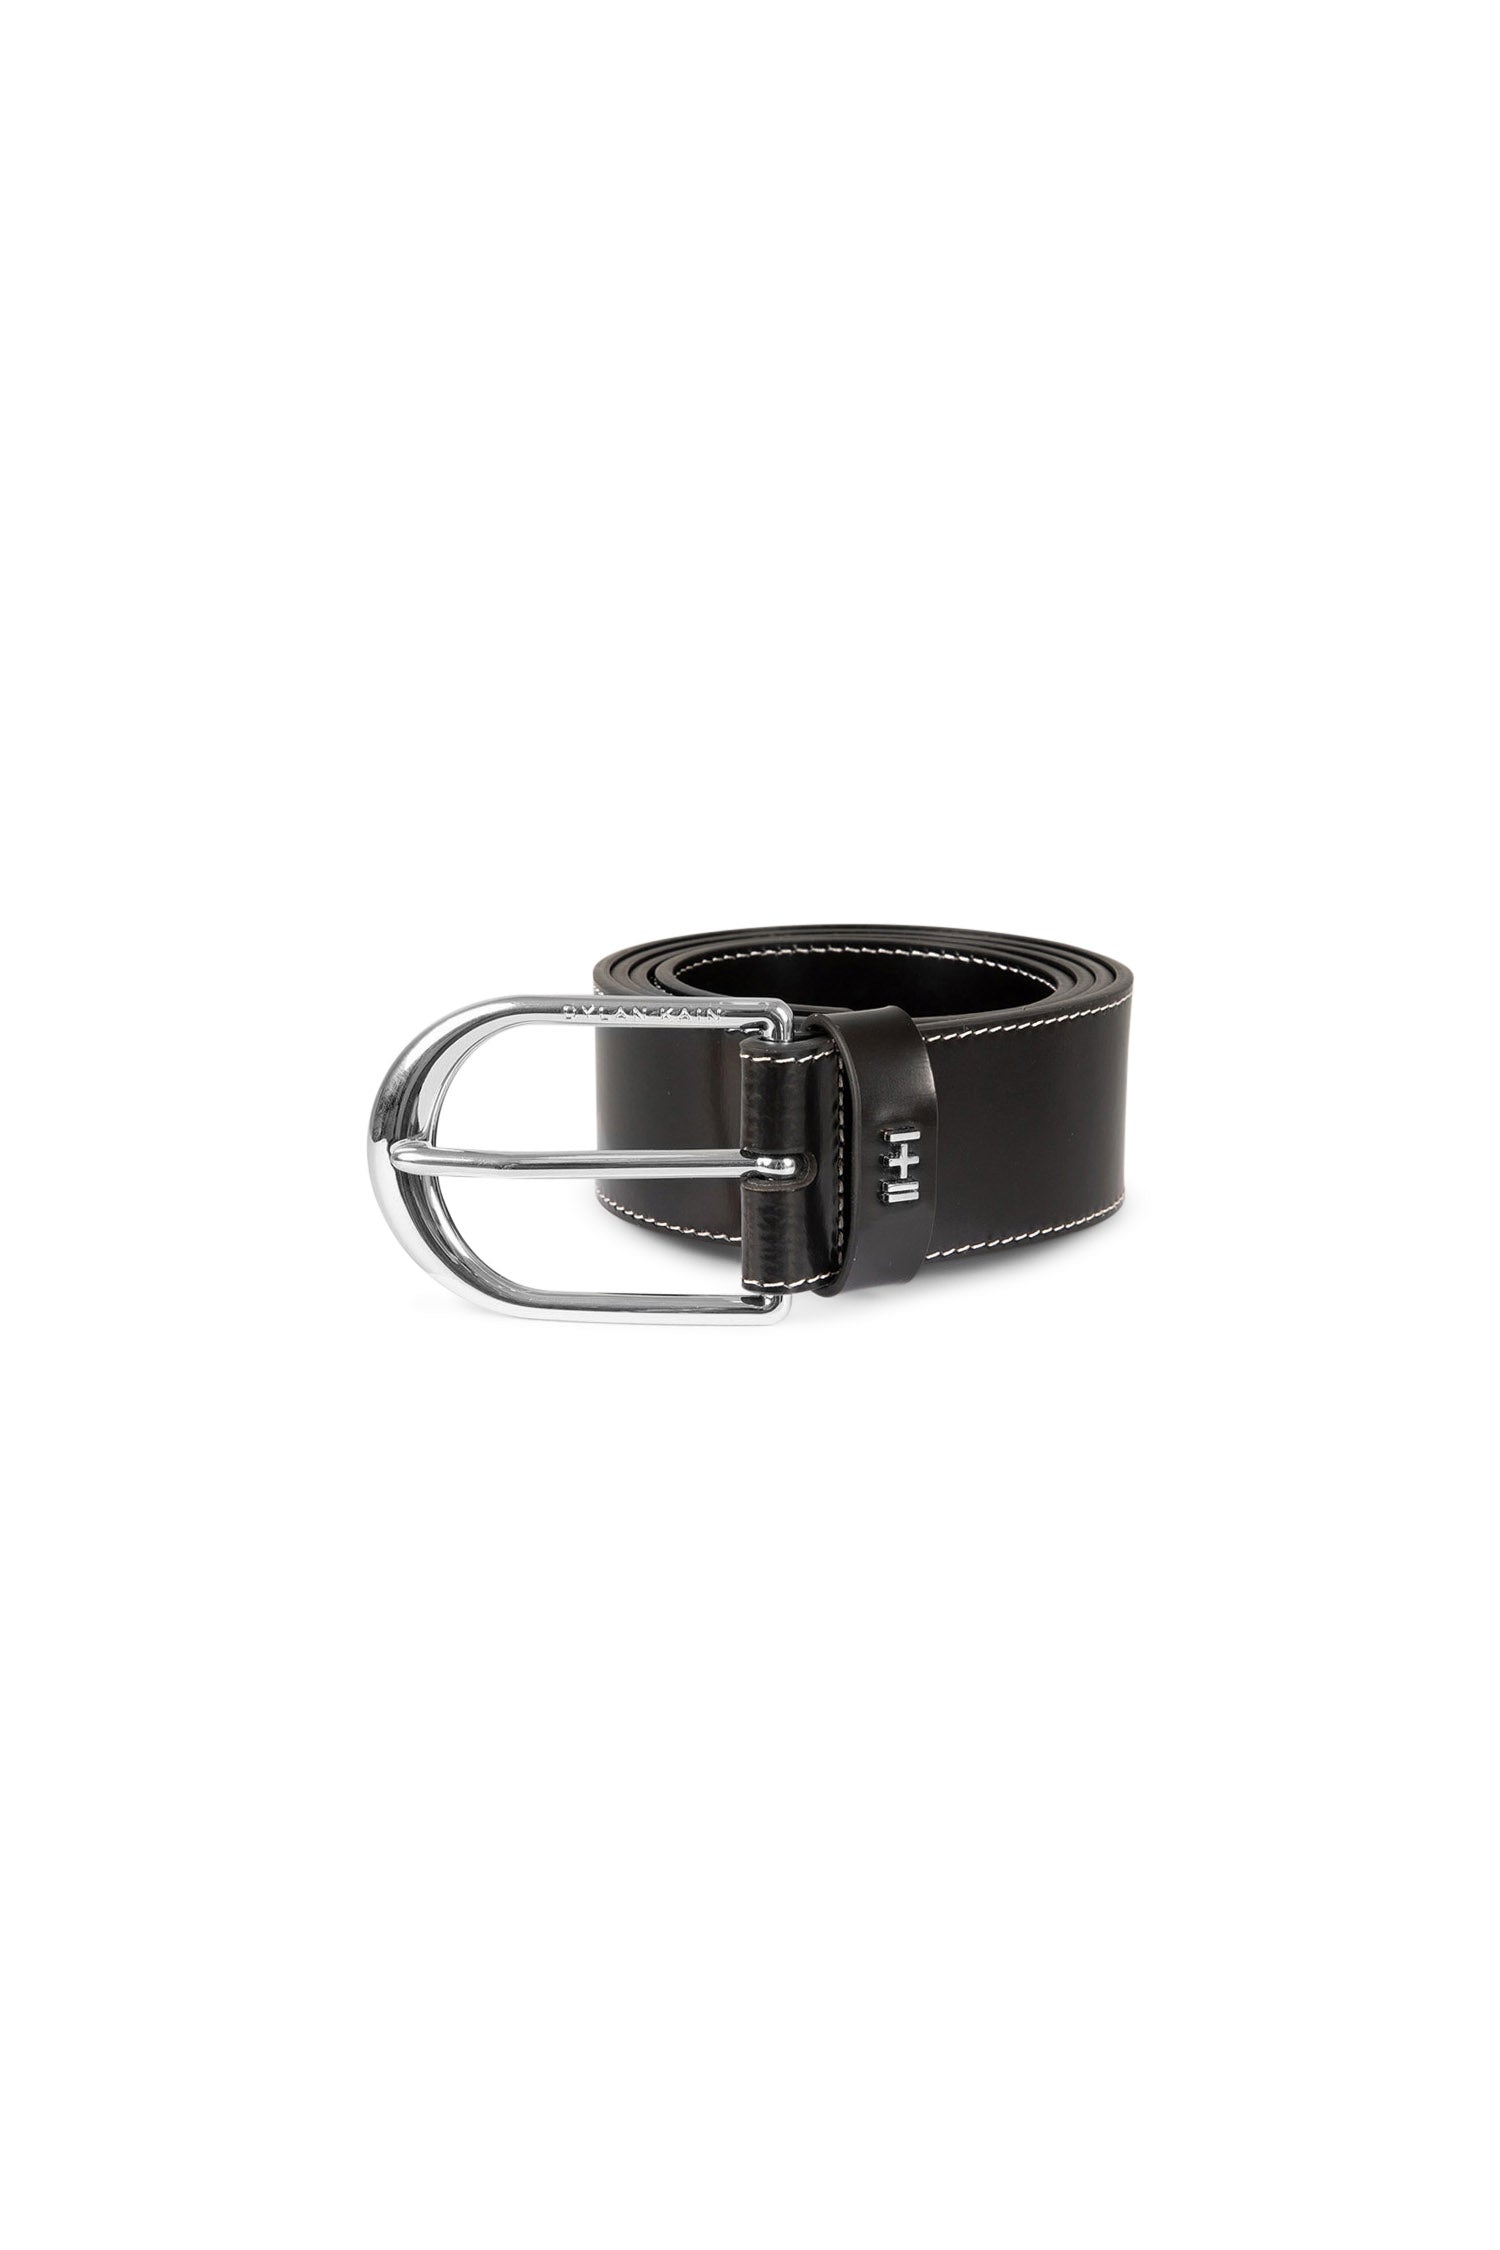 The Nika Lux Belt Silver